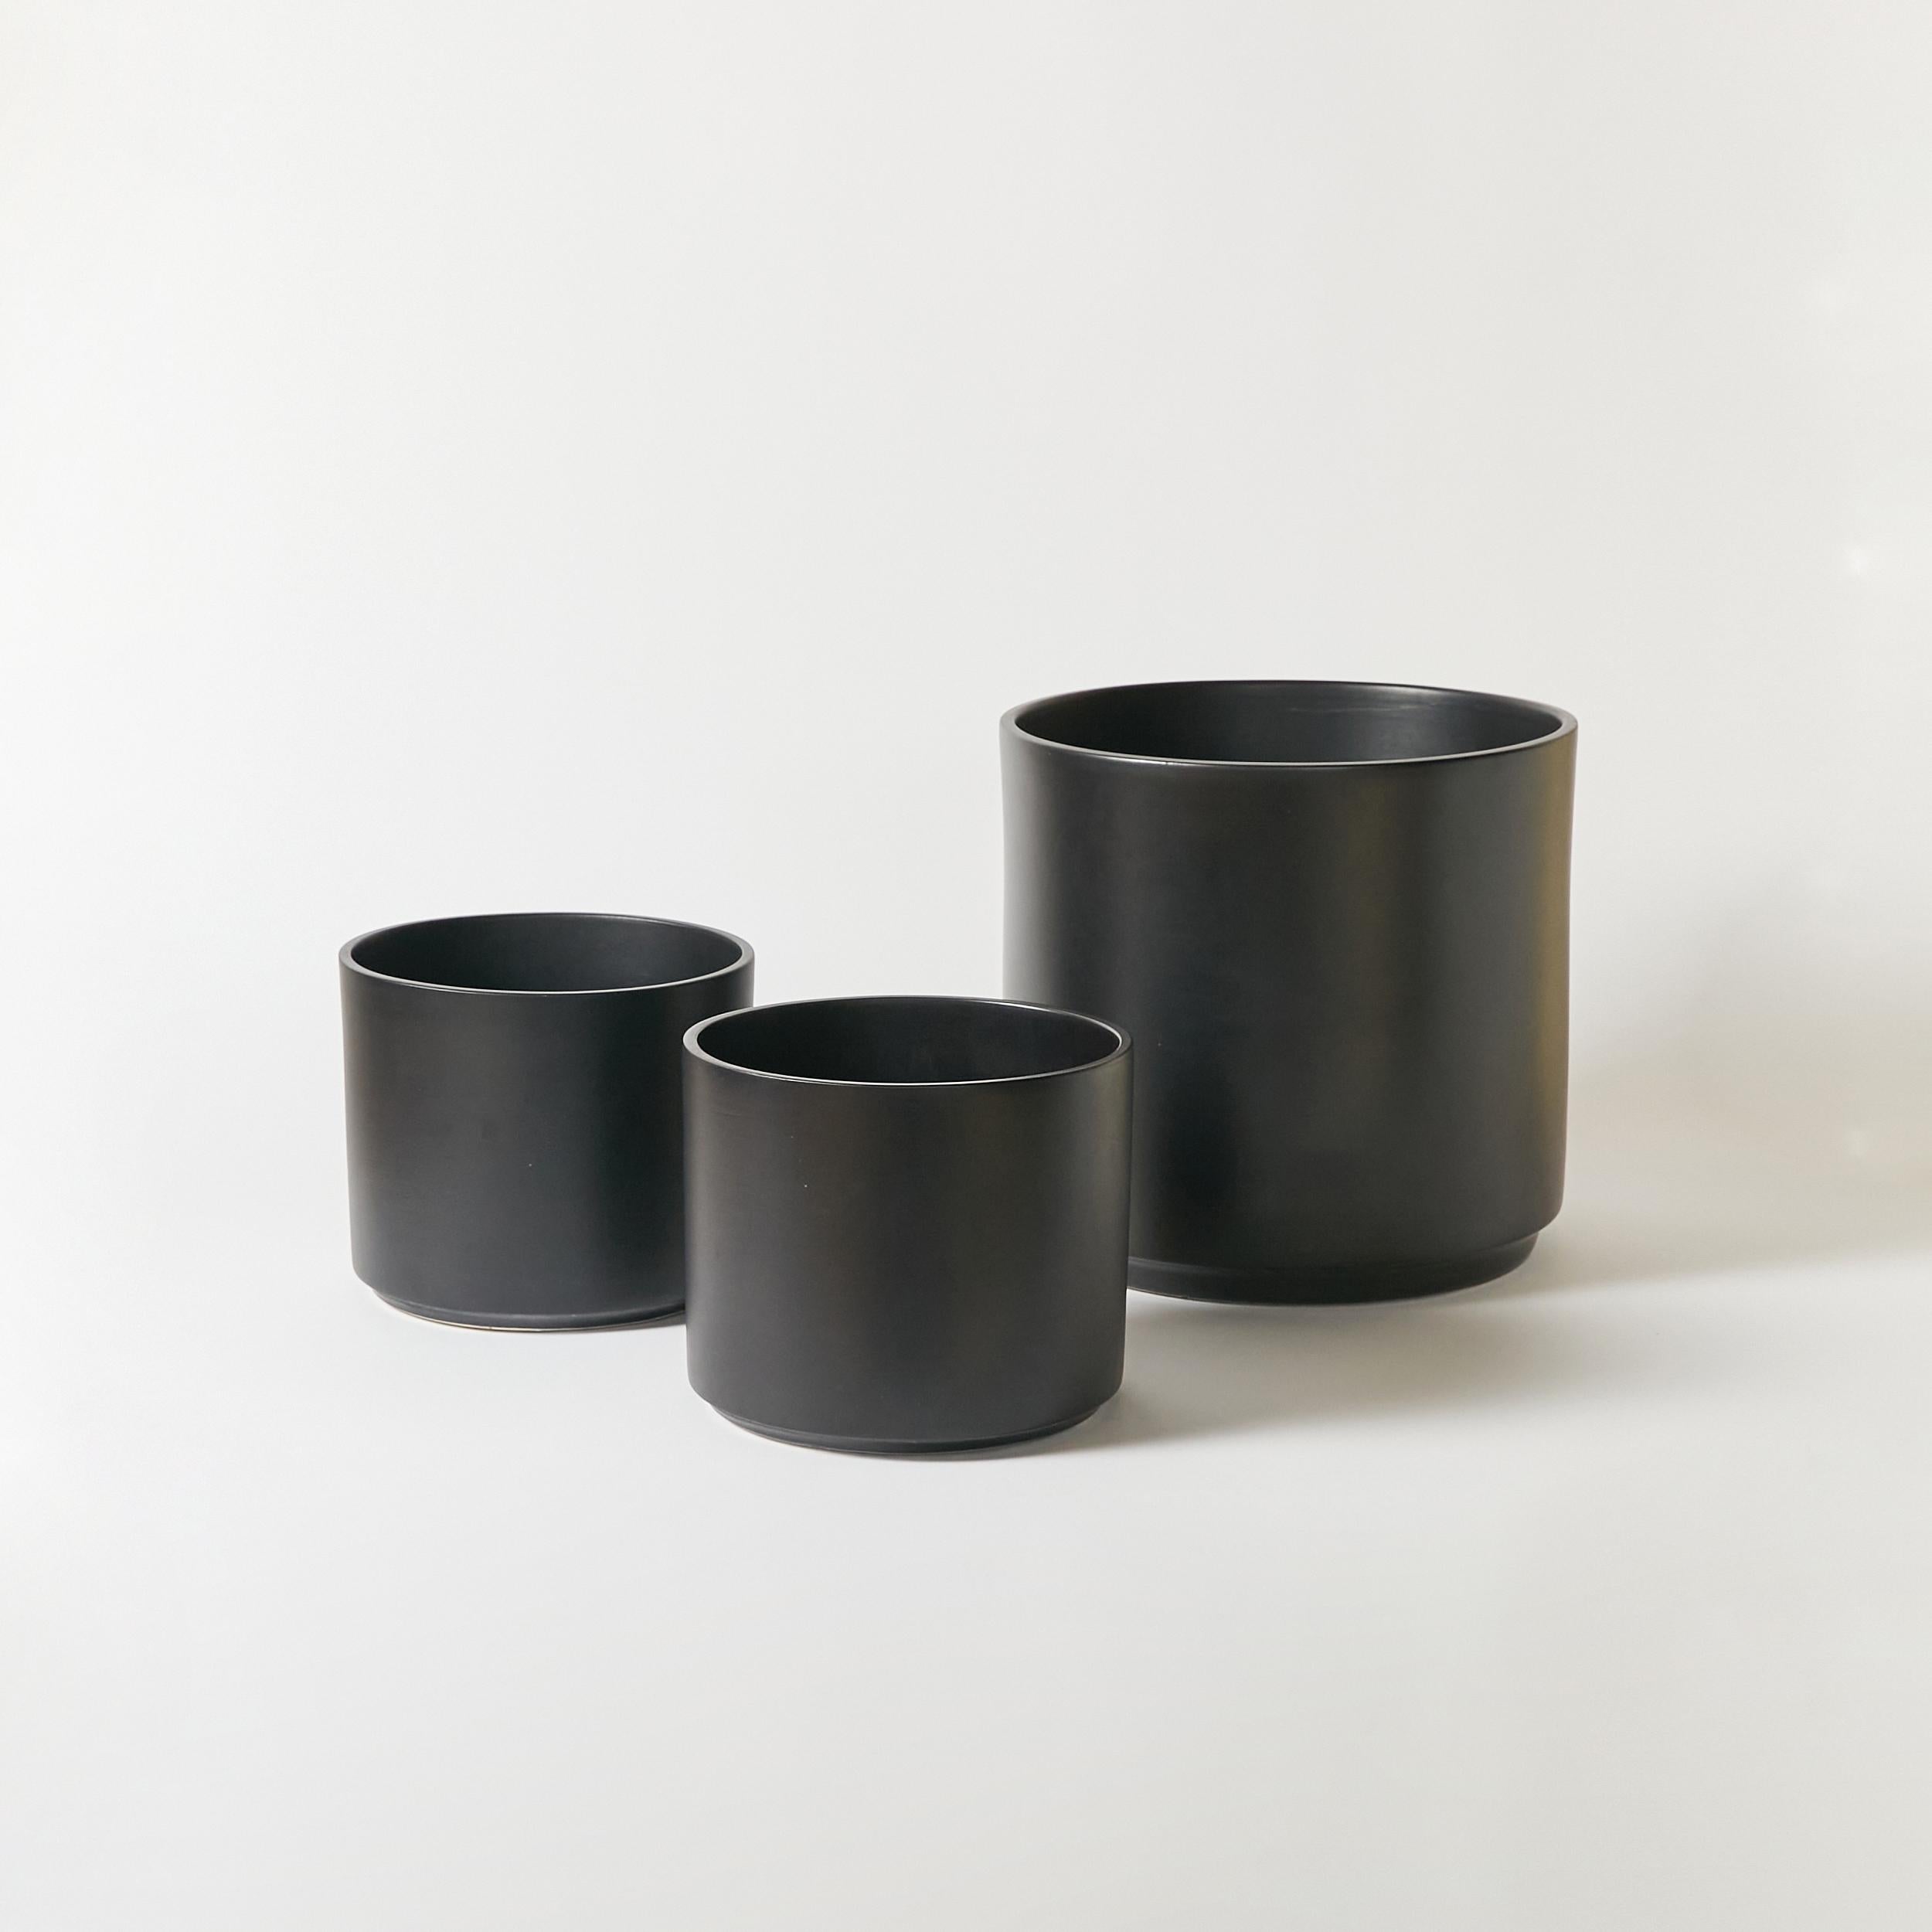 Large Gainey Planter in Satin Black Glaze, California Architectural Pottery In Good Condition For Sale In Philadelphia, PA